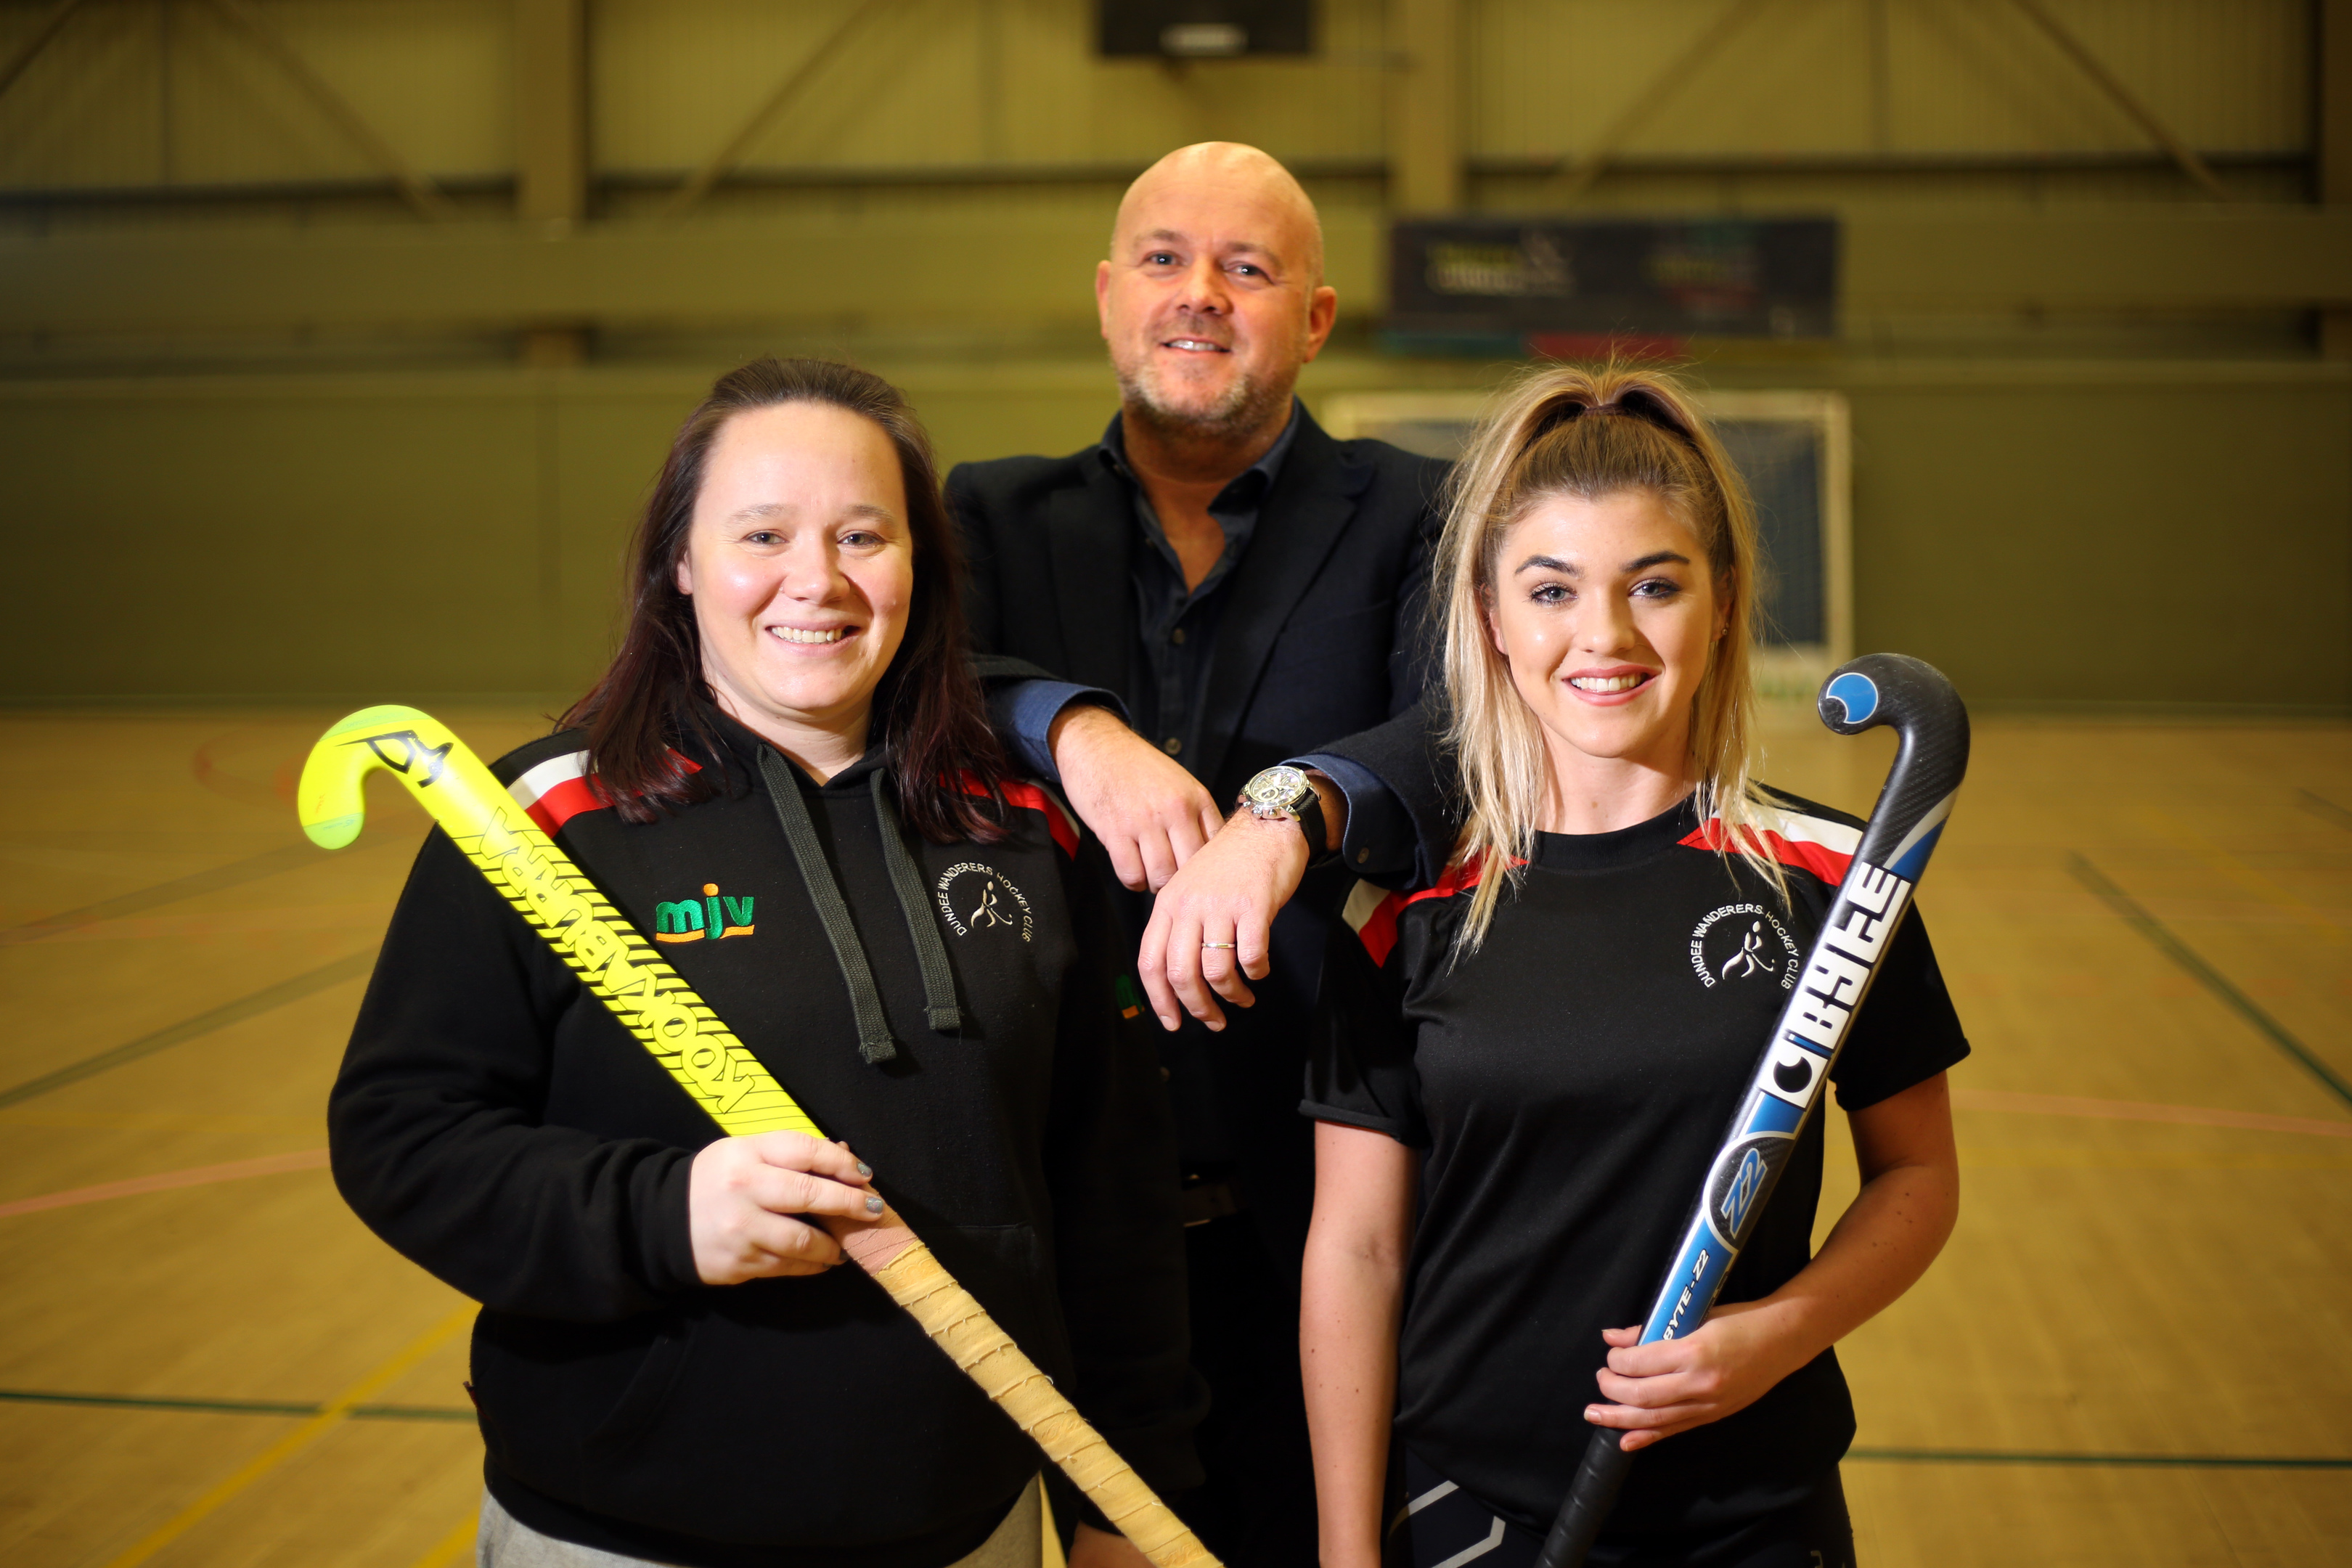 Sam Sangster and Jess Ross from Dundee Wanderers Hockey Club with Richard Kilcullen, the managing director of Kilmac.